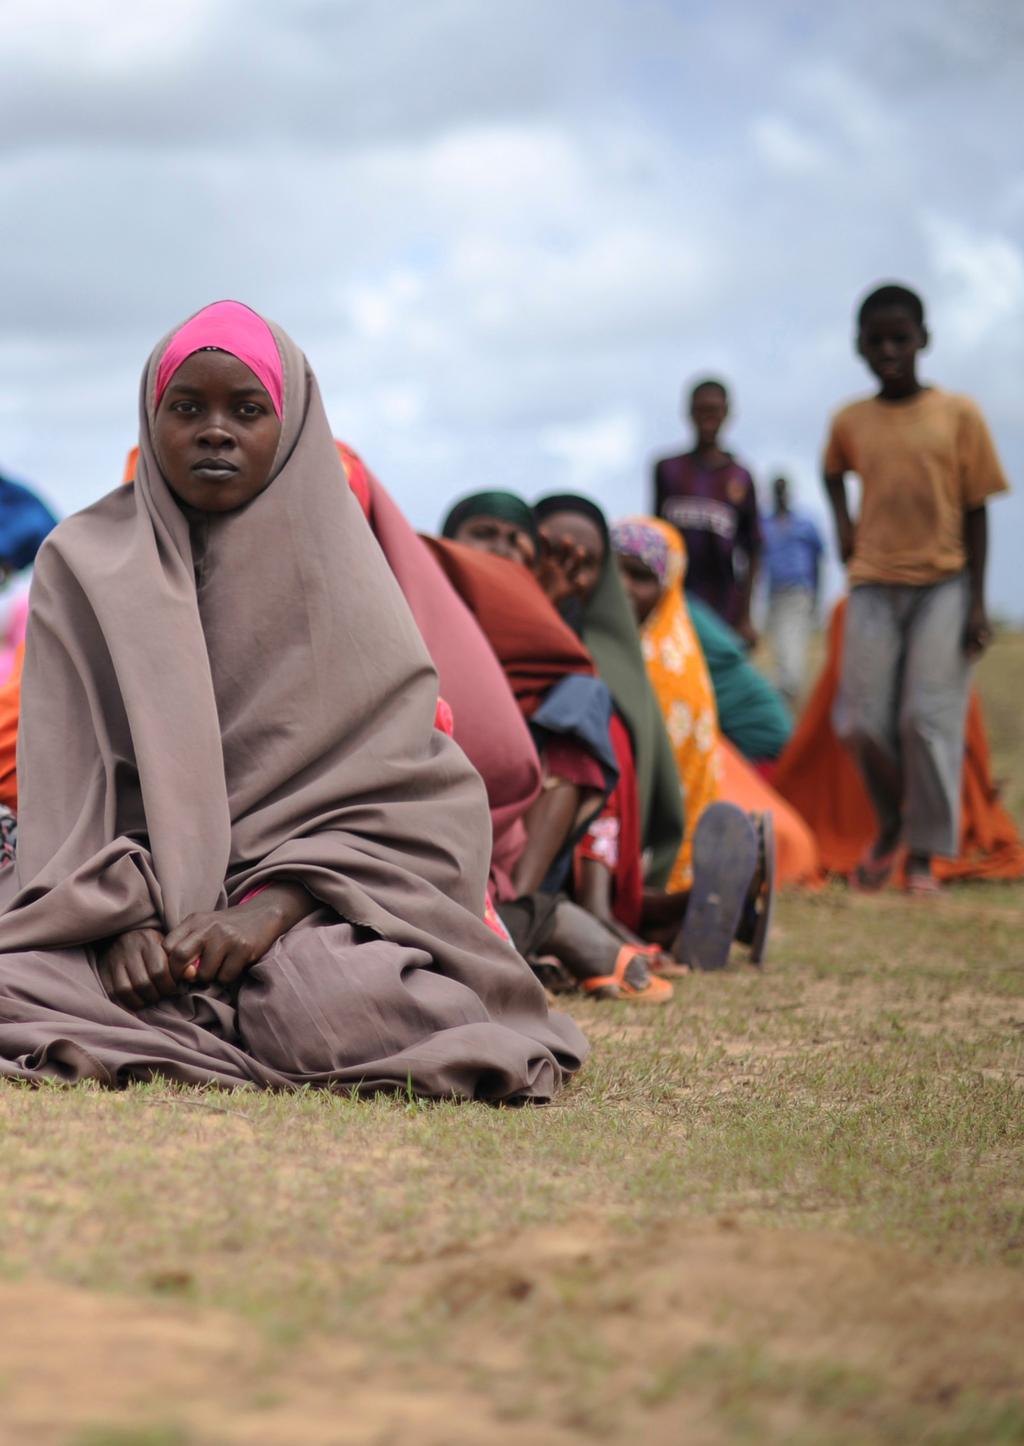 Displaced people waiting at a food distribution center in Afgoye, Somalia, on 4 August 2013. The U.A.E Red Crescent provided food aid as part of a programme they are conducting during the month of Ramadan.